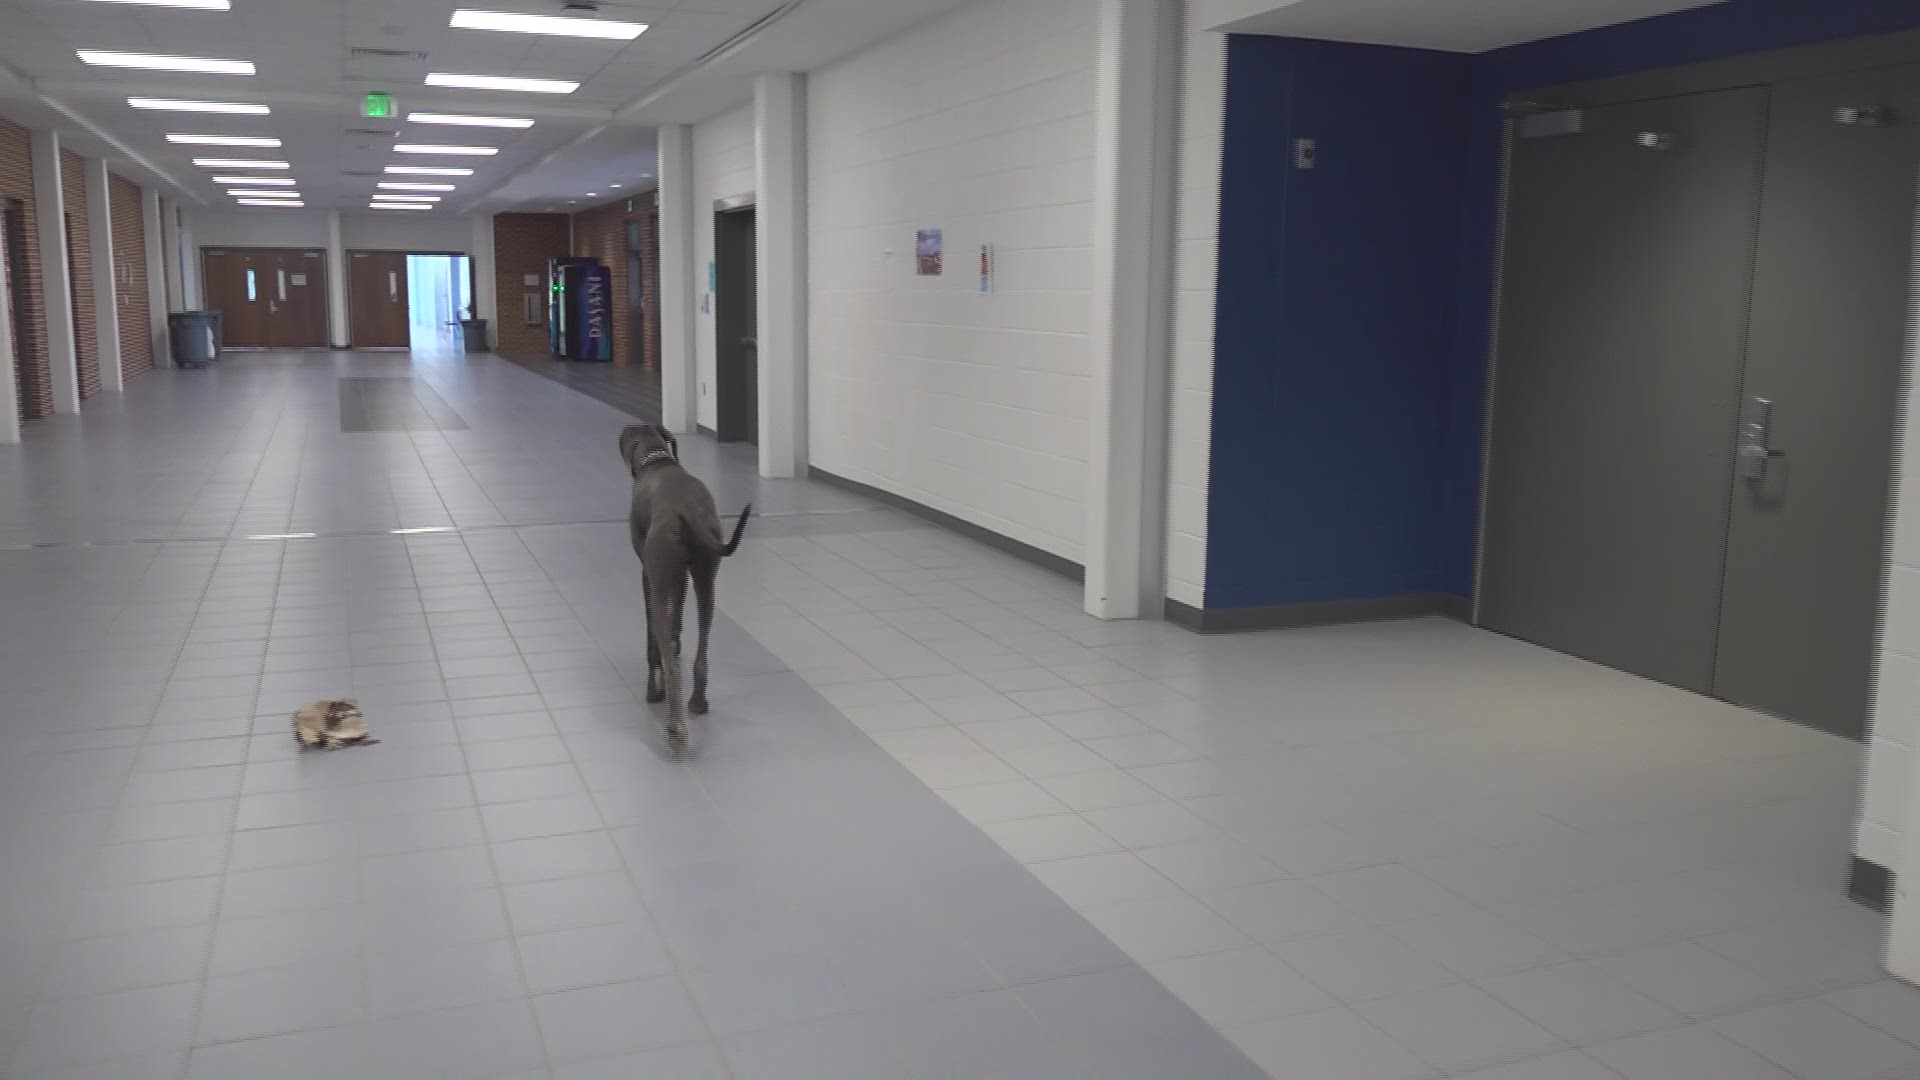 Video of Denny and Percy, the great danes at Denmark Highschool